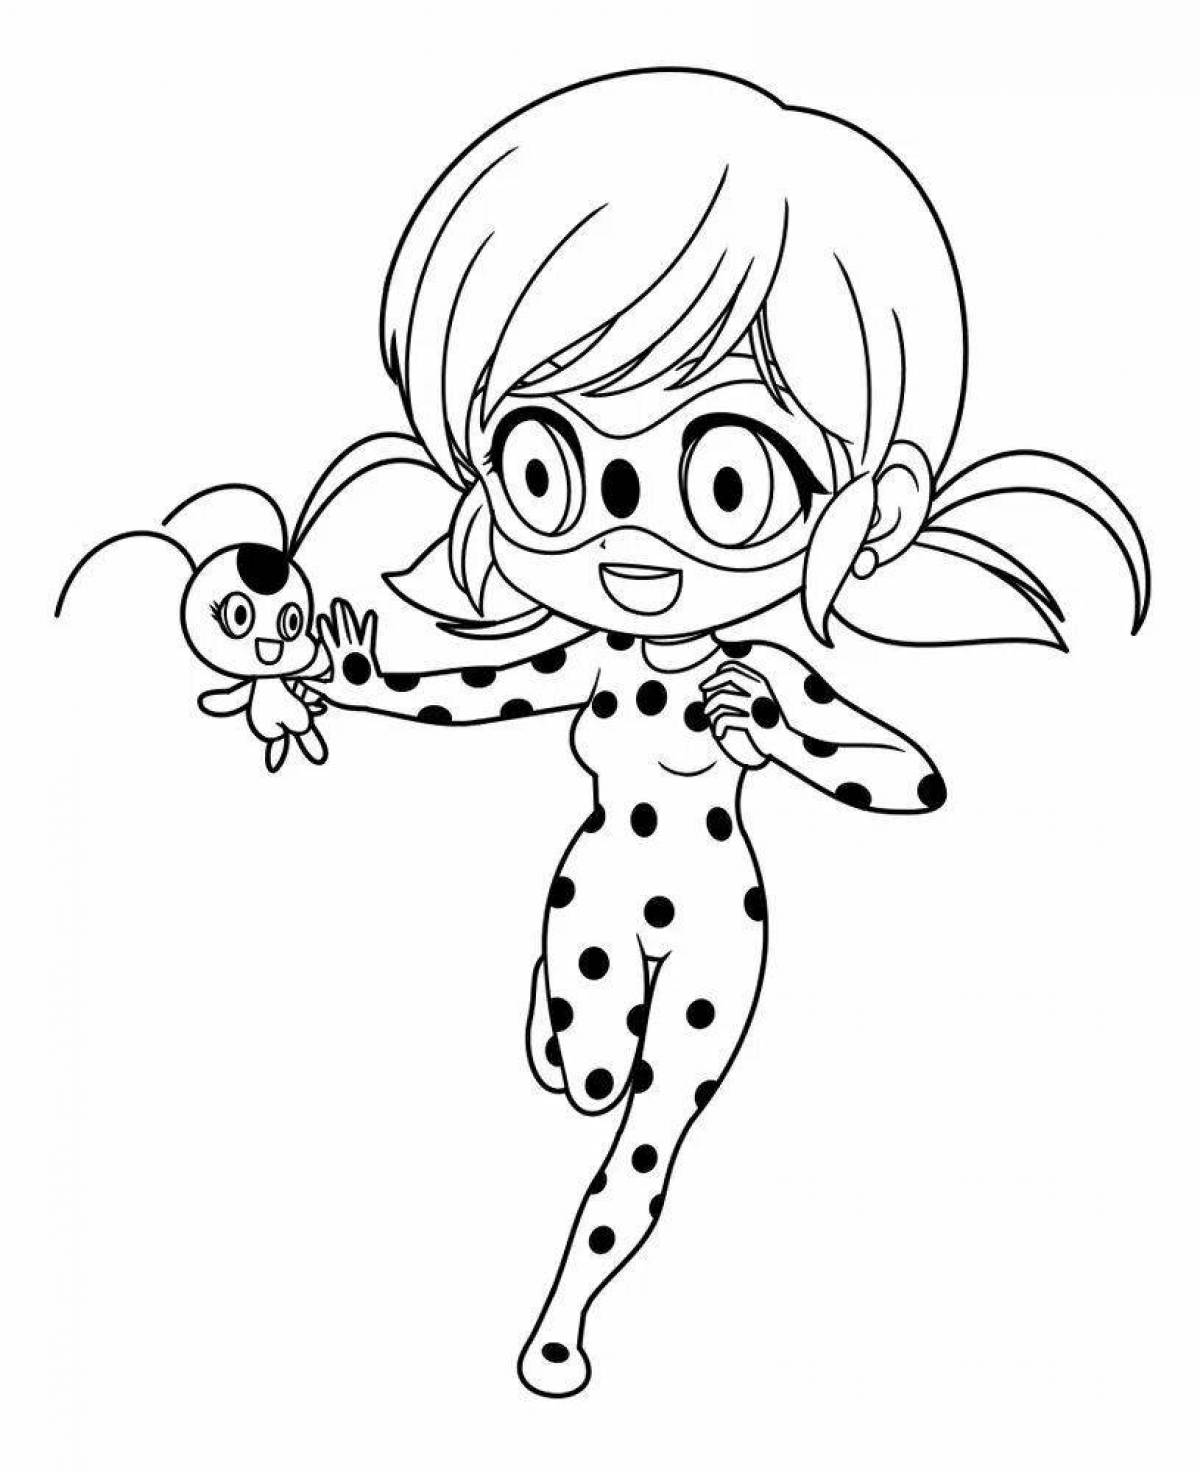 Courageous ladybug coloring page